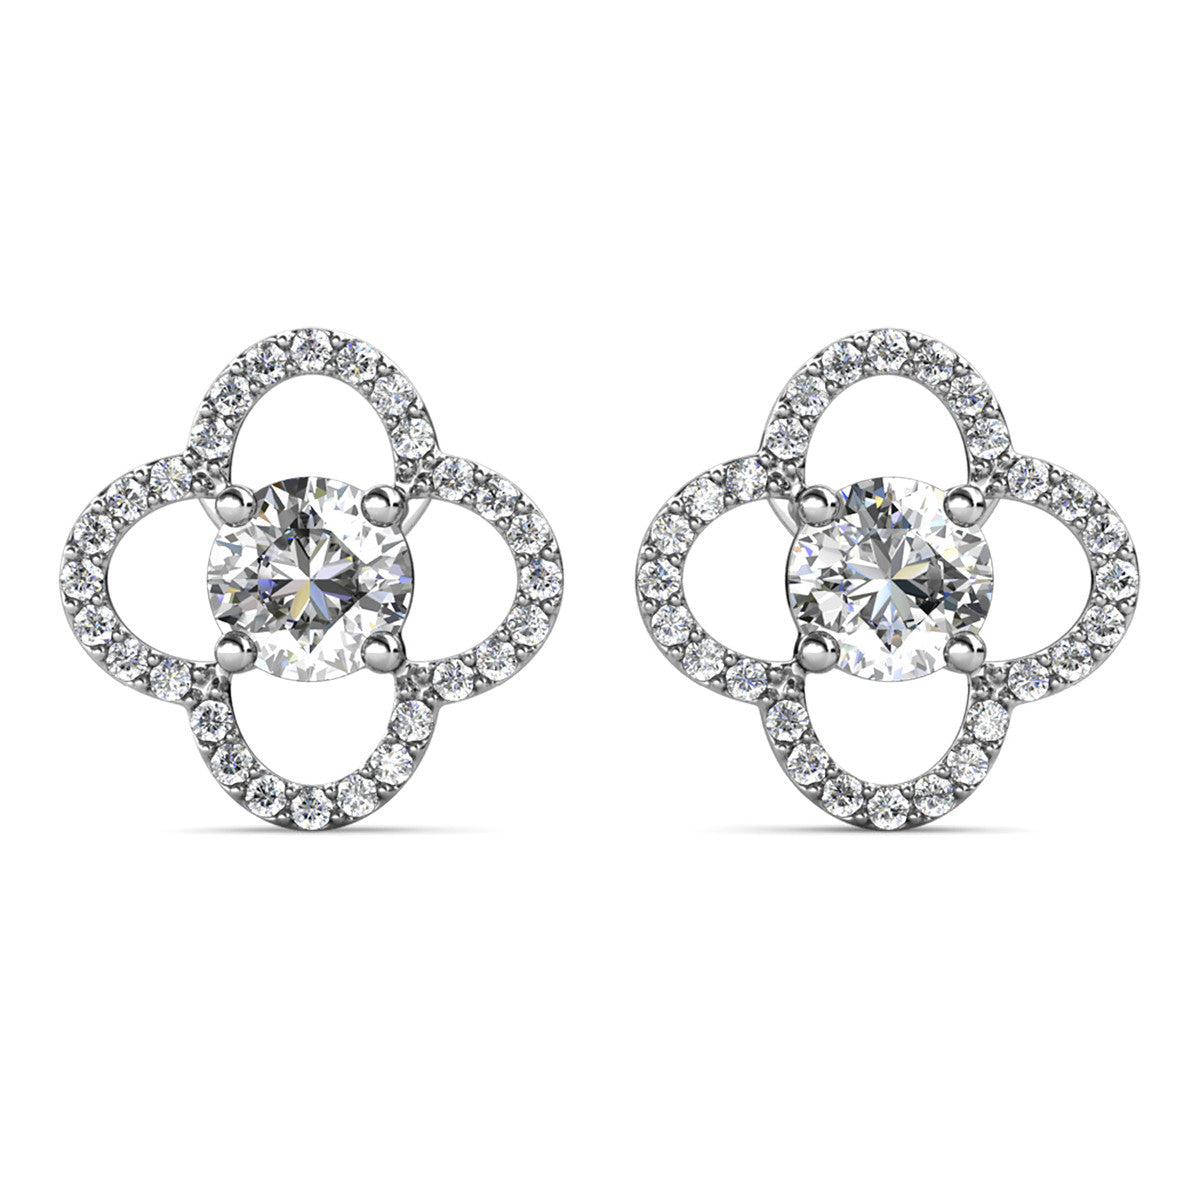 Moissanite by Cate & Chloe Charlotte Sterling Silver Stud Earrings with Moissanite Crystals